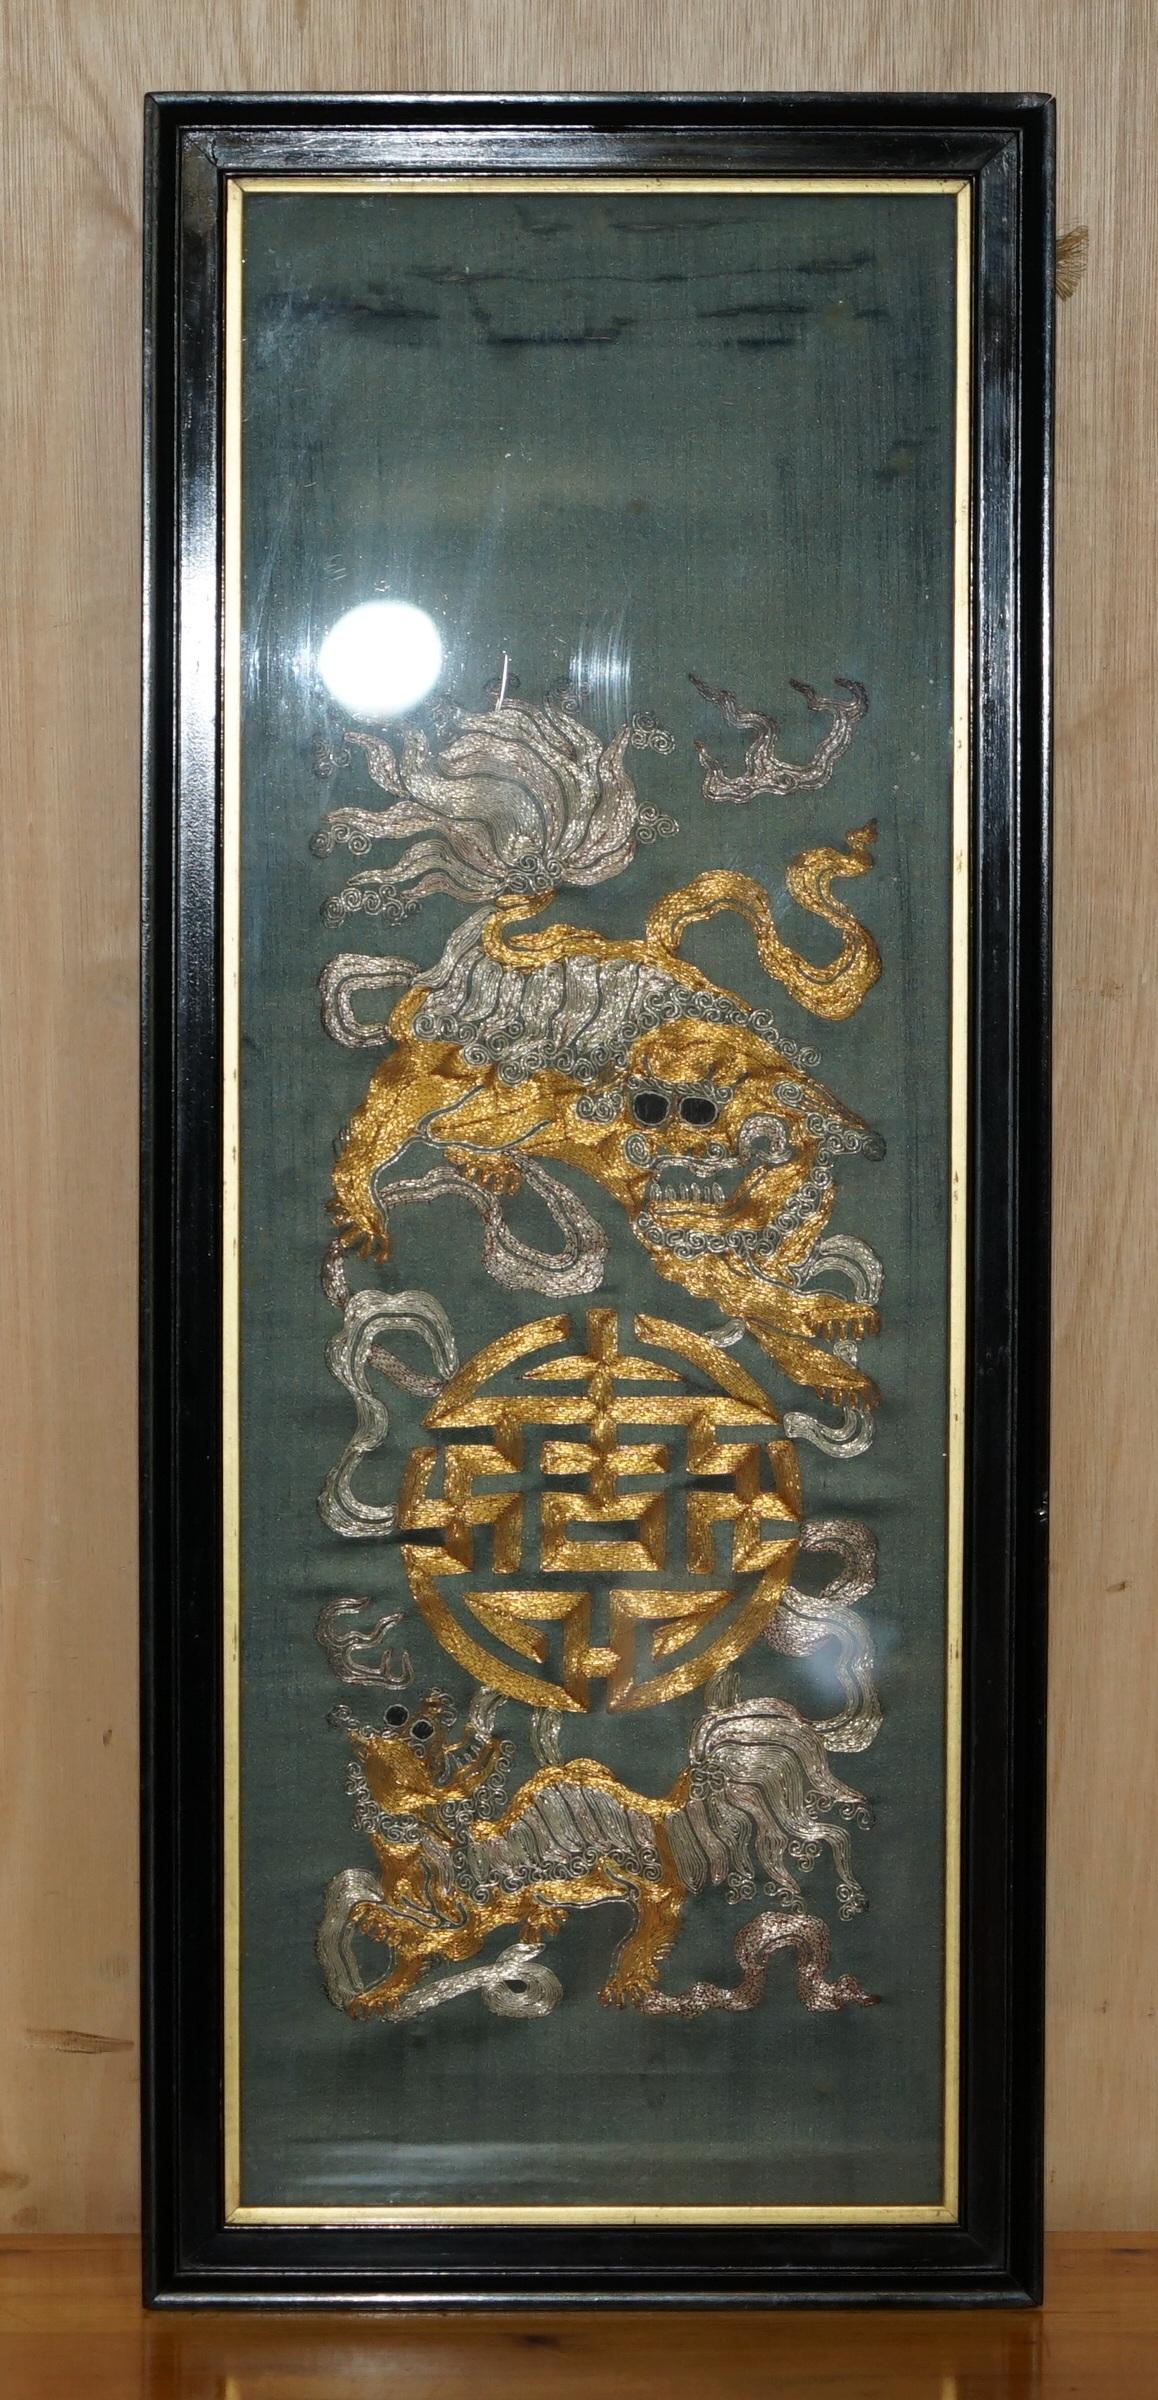 Royal House Antiques

Royal House Antiques is delighted to offer for sale this stunning pair of original circa 1880 Chinese gold and silver threaded tapestry on silk depicting Chinese Foo Dog's and Dragons 

Please note the delivery fee listed is